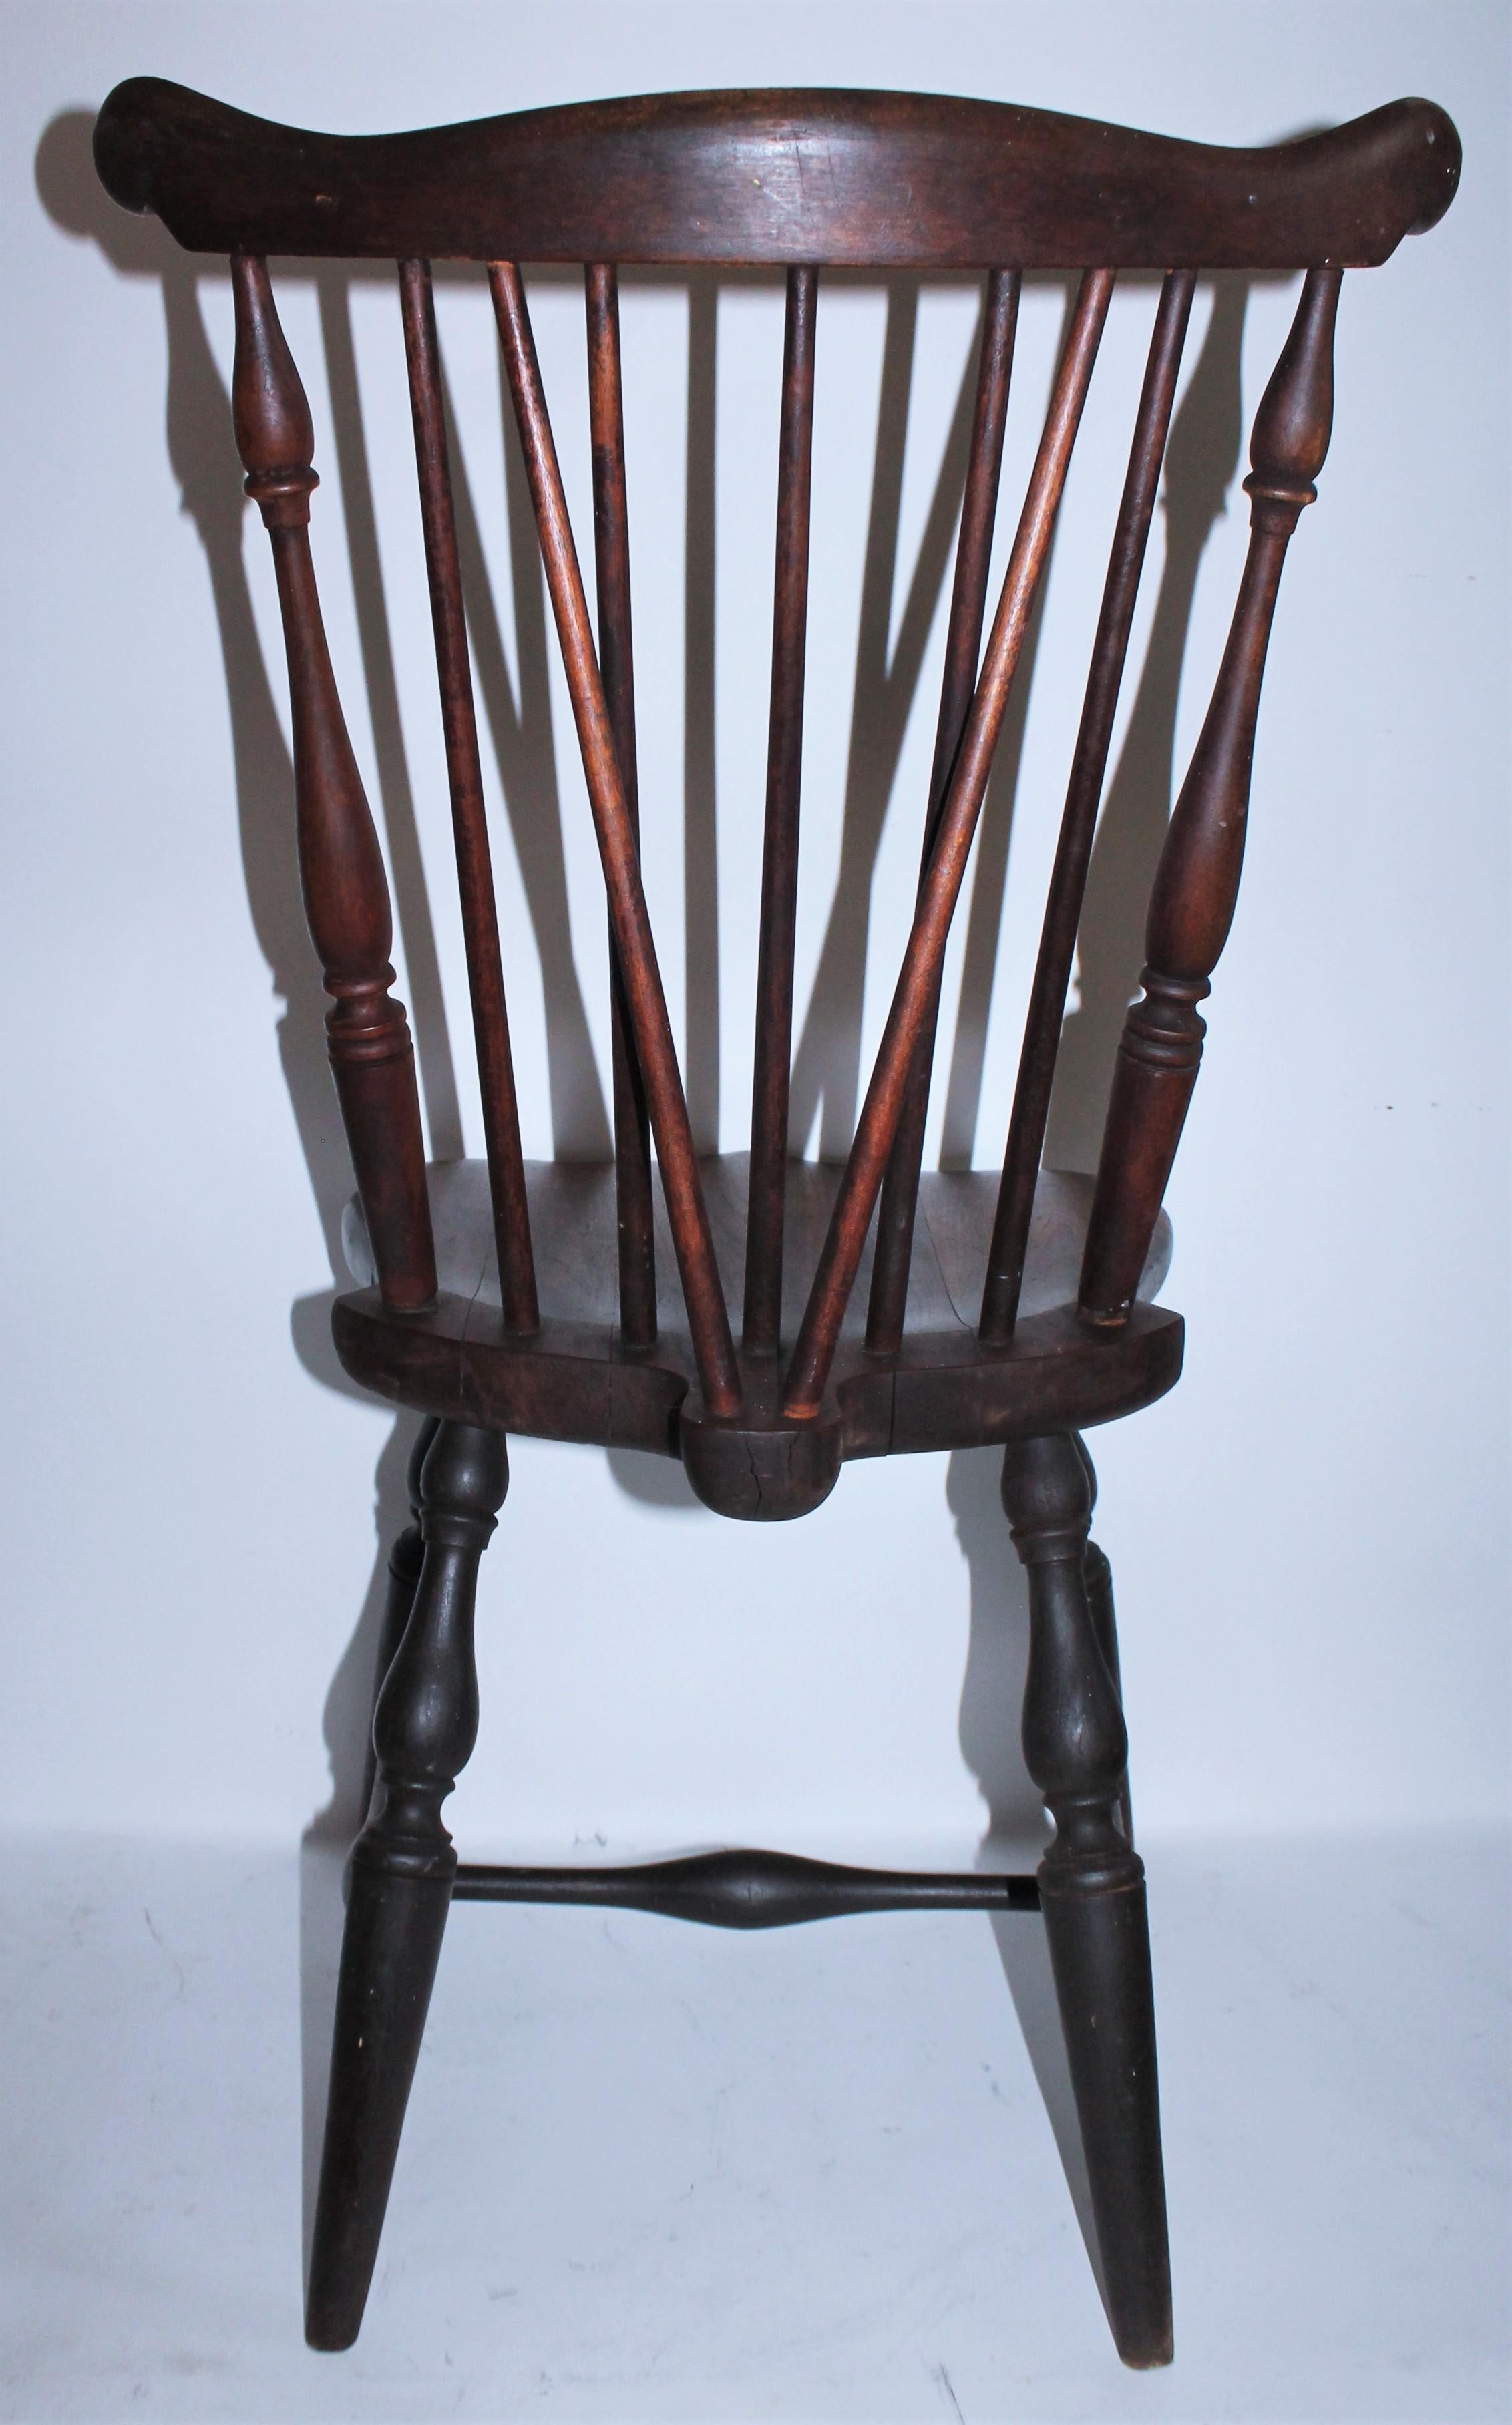 Country 19th Century Brace Back Windsor Chair with Saddle Seat